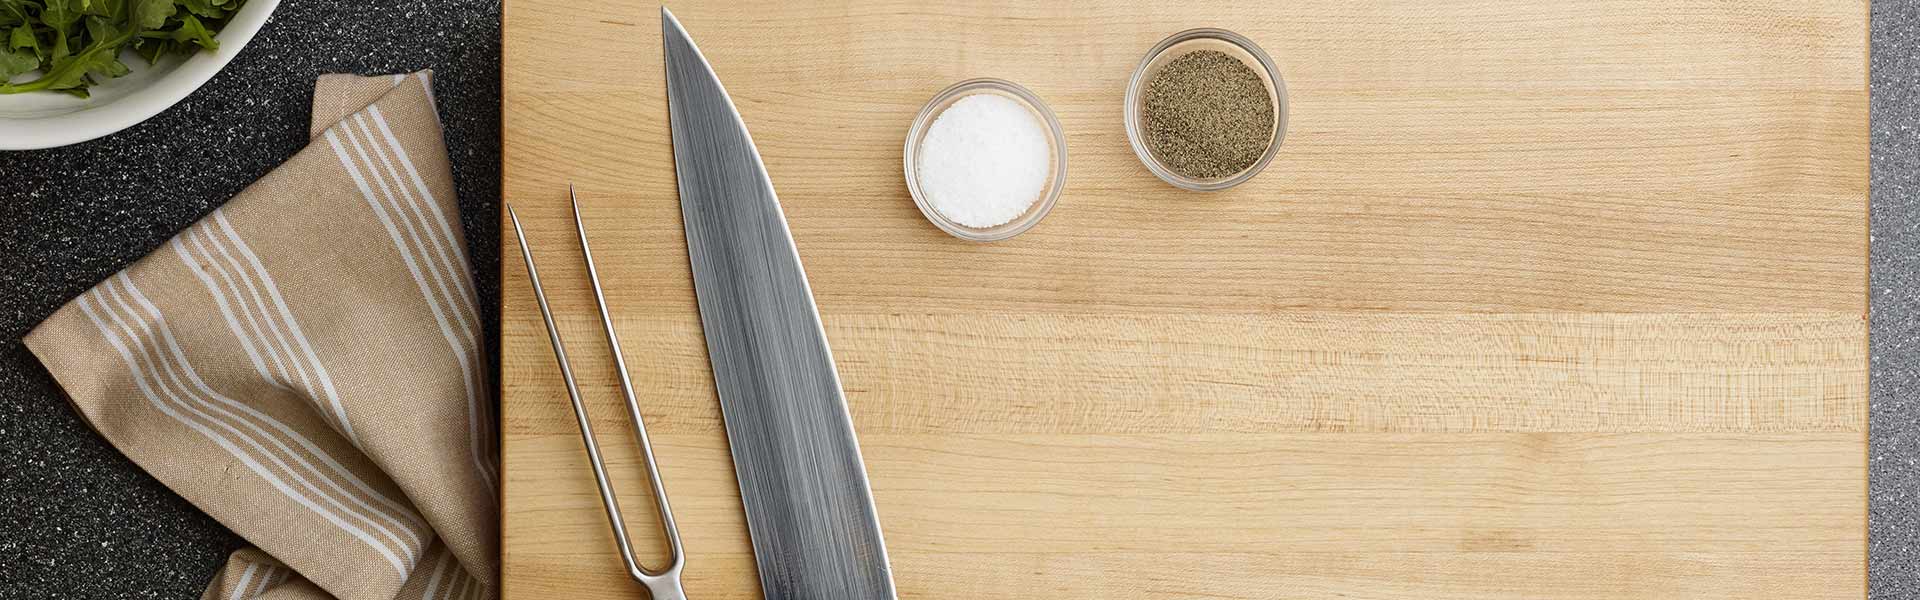 Cutting board with knives, salt, and pepper